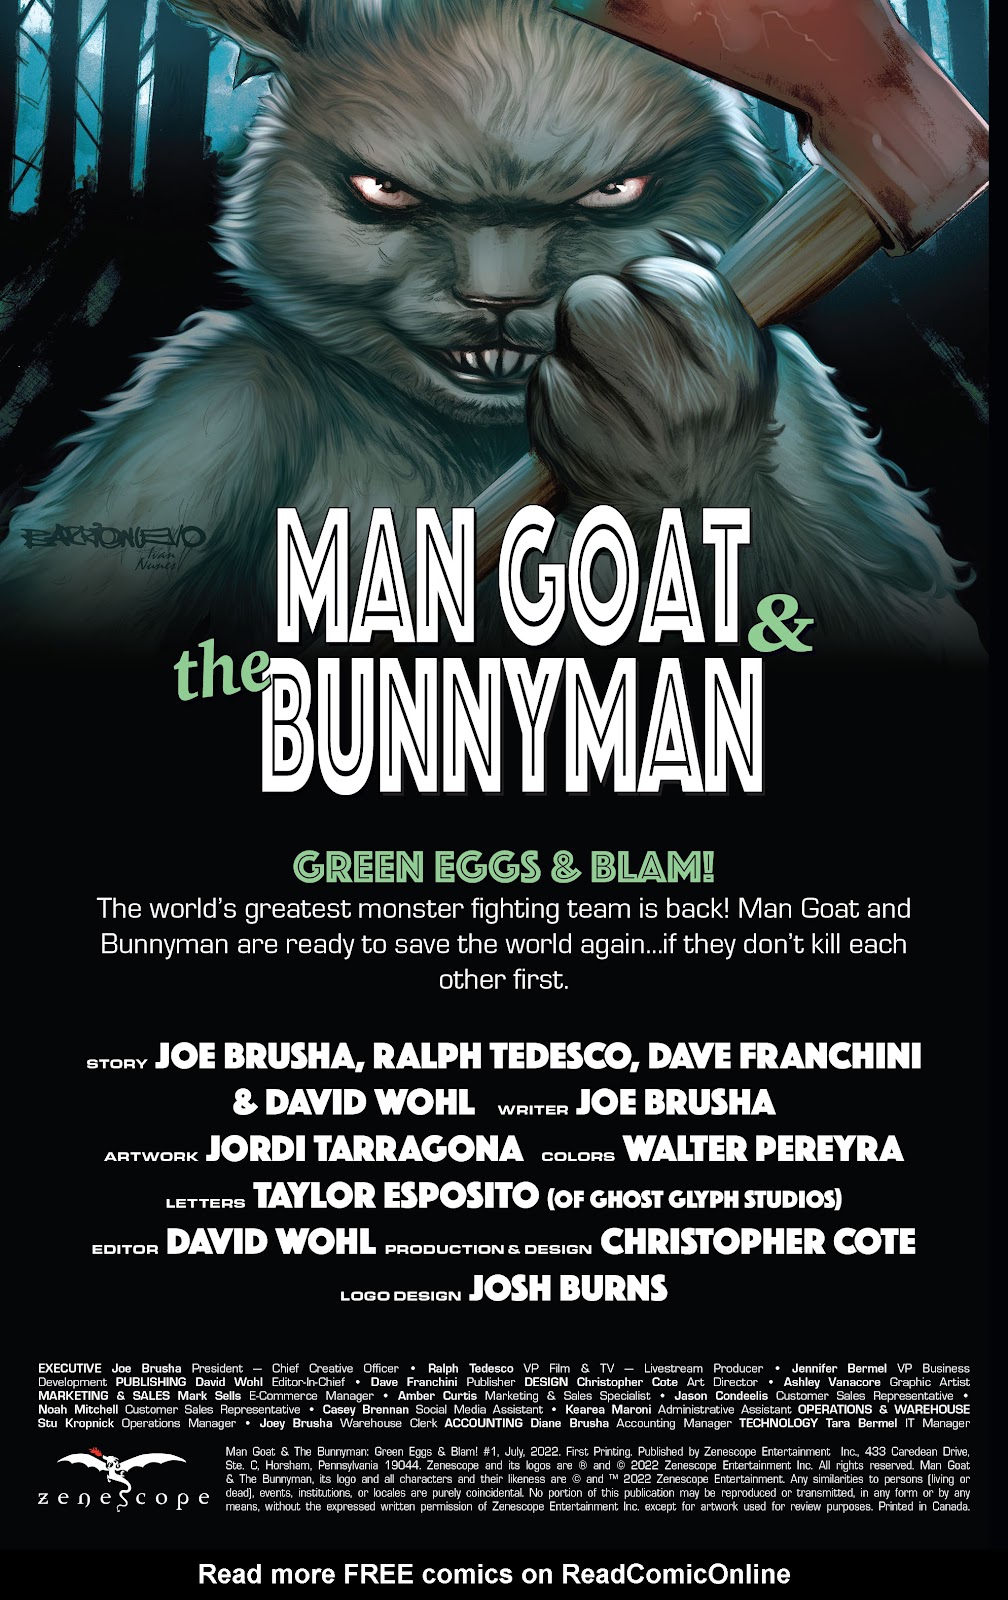 Man Goat & the Bunnyman: Green Eggs & Blam issue 1 - Page 2